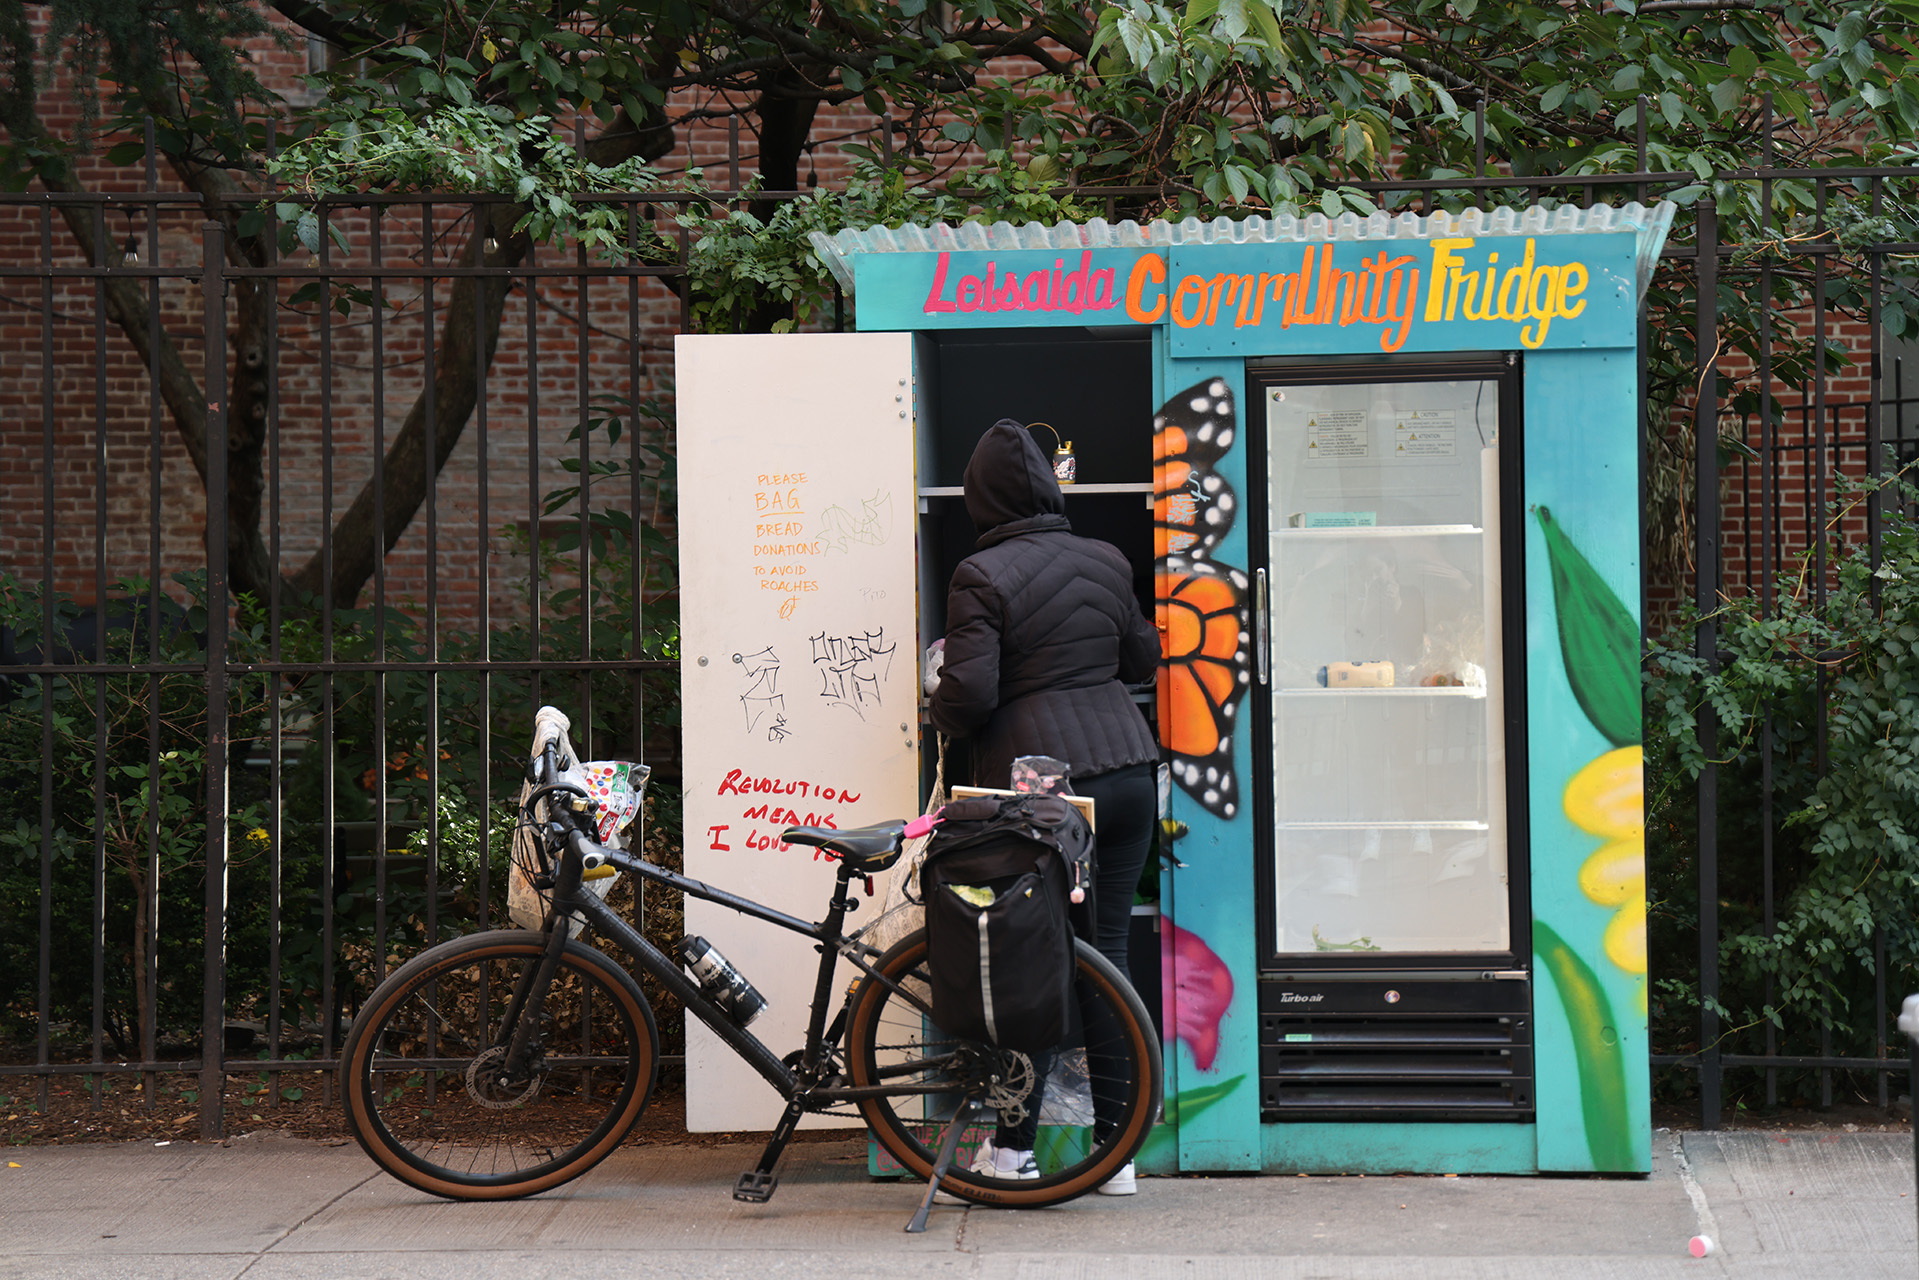 A student with a bike looks at a nearly empty community fridge